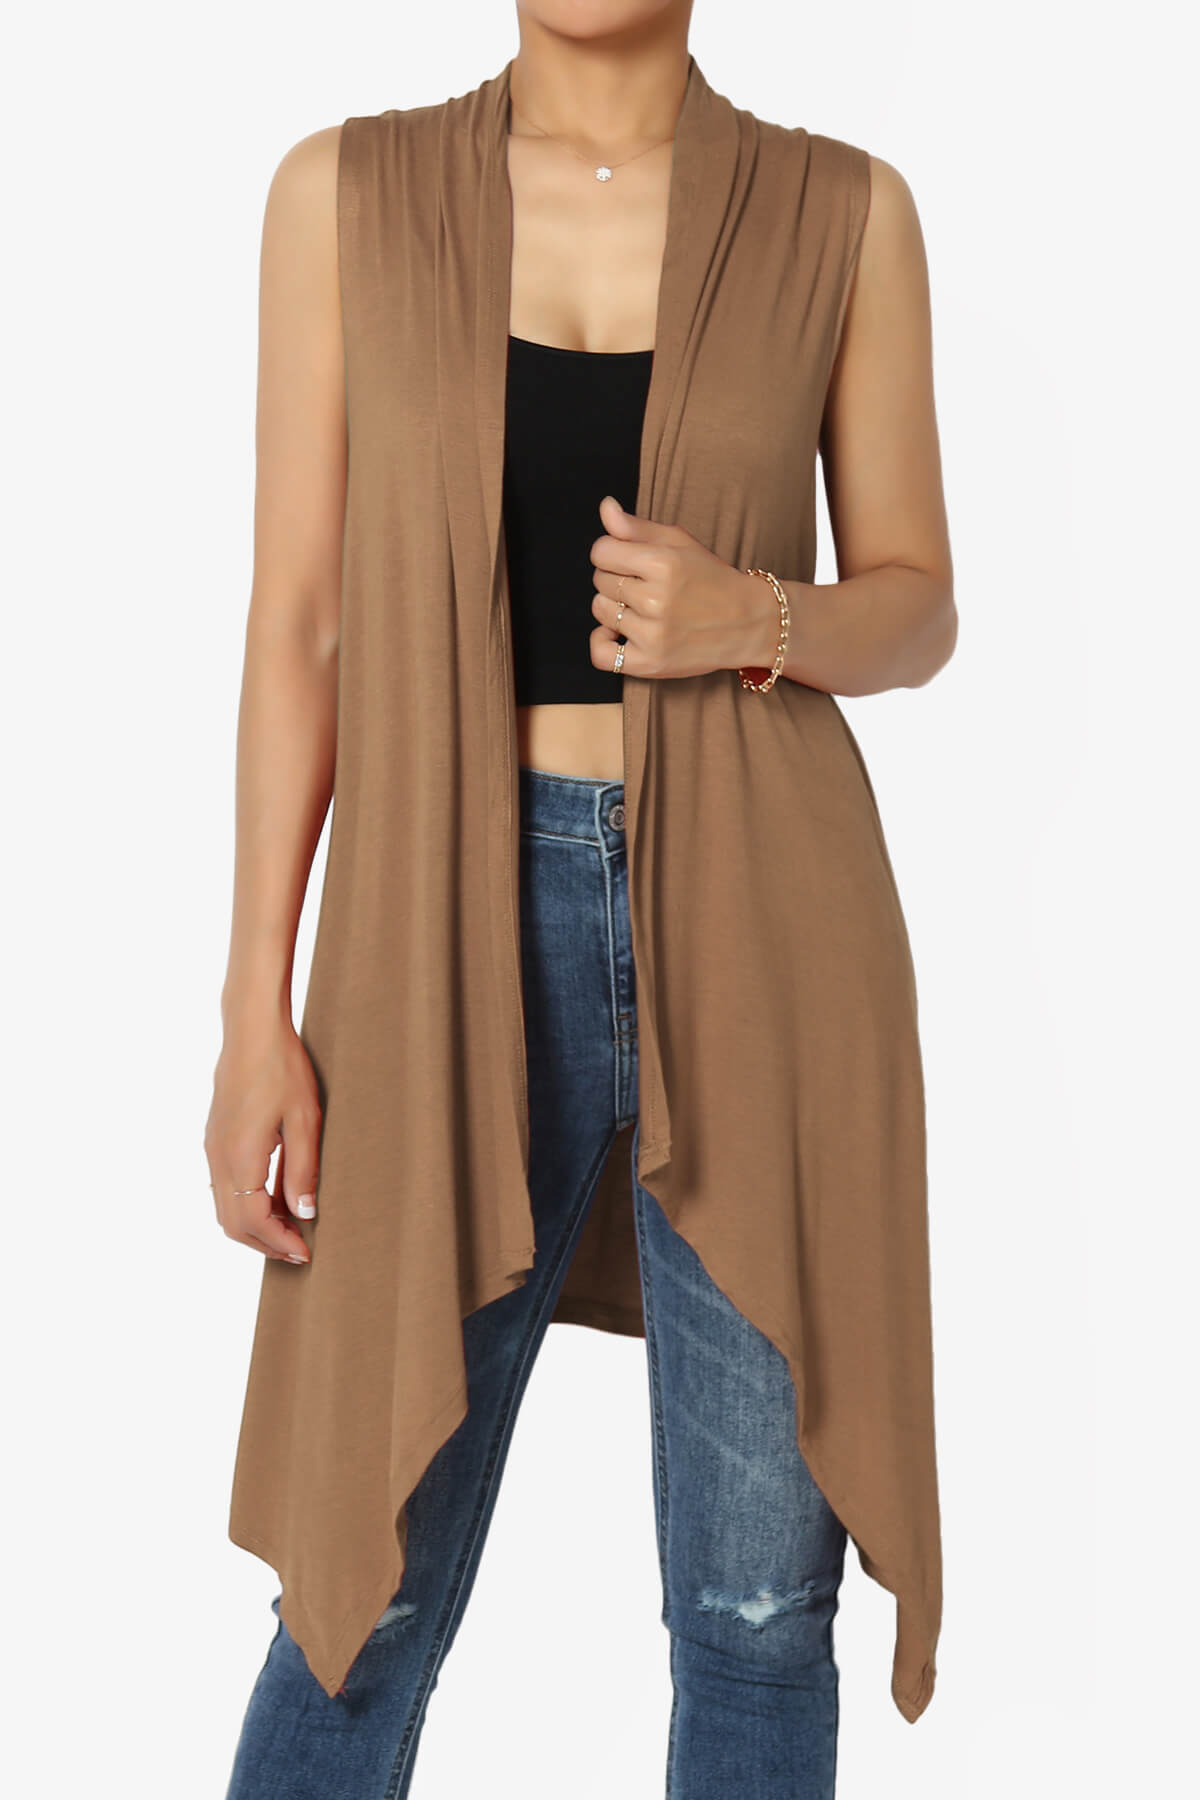 Load image into Gallery viewer, Taysom Draped Open Front Sleeveless Cardigan Vest DEEP CAMEL_1
